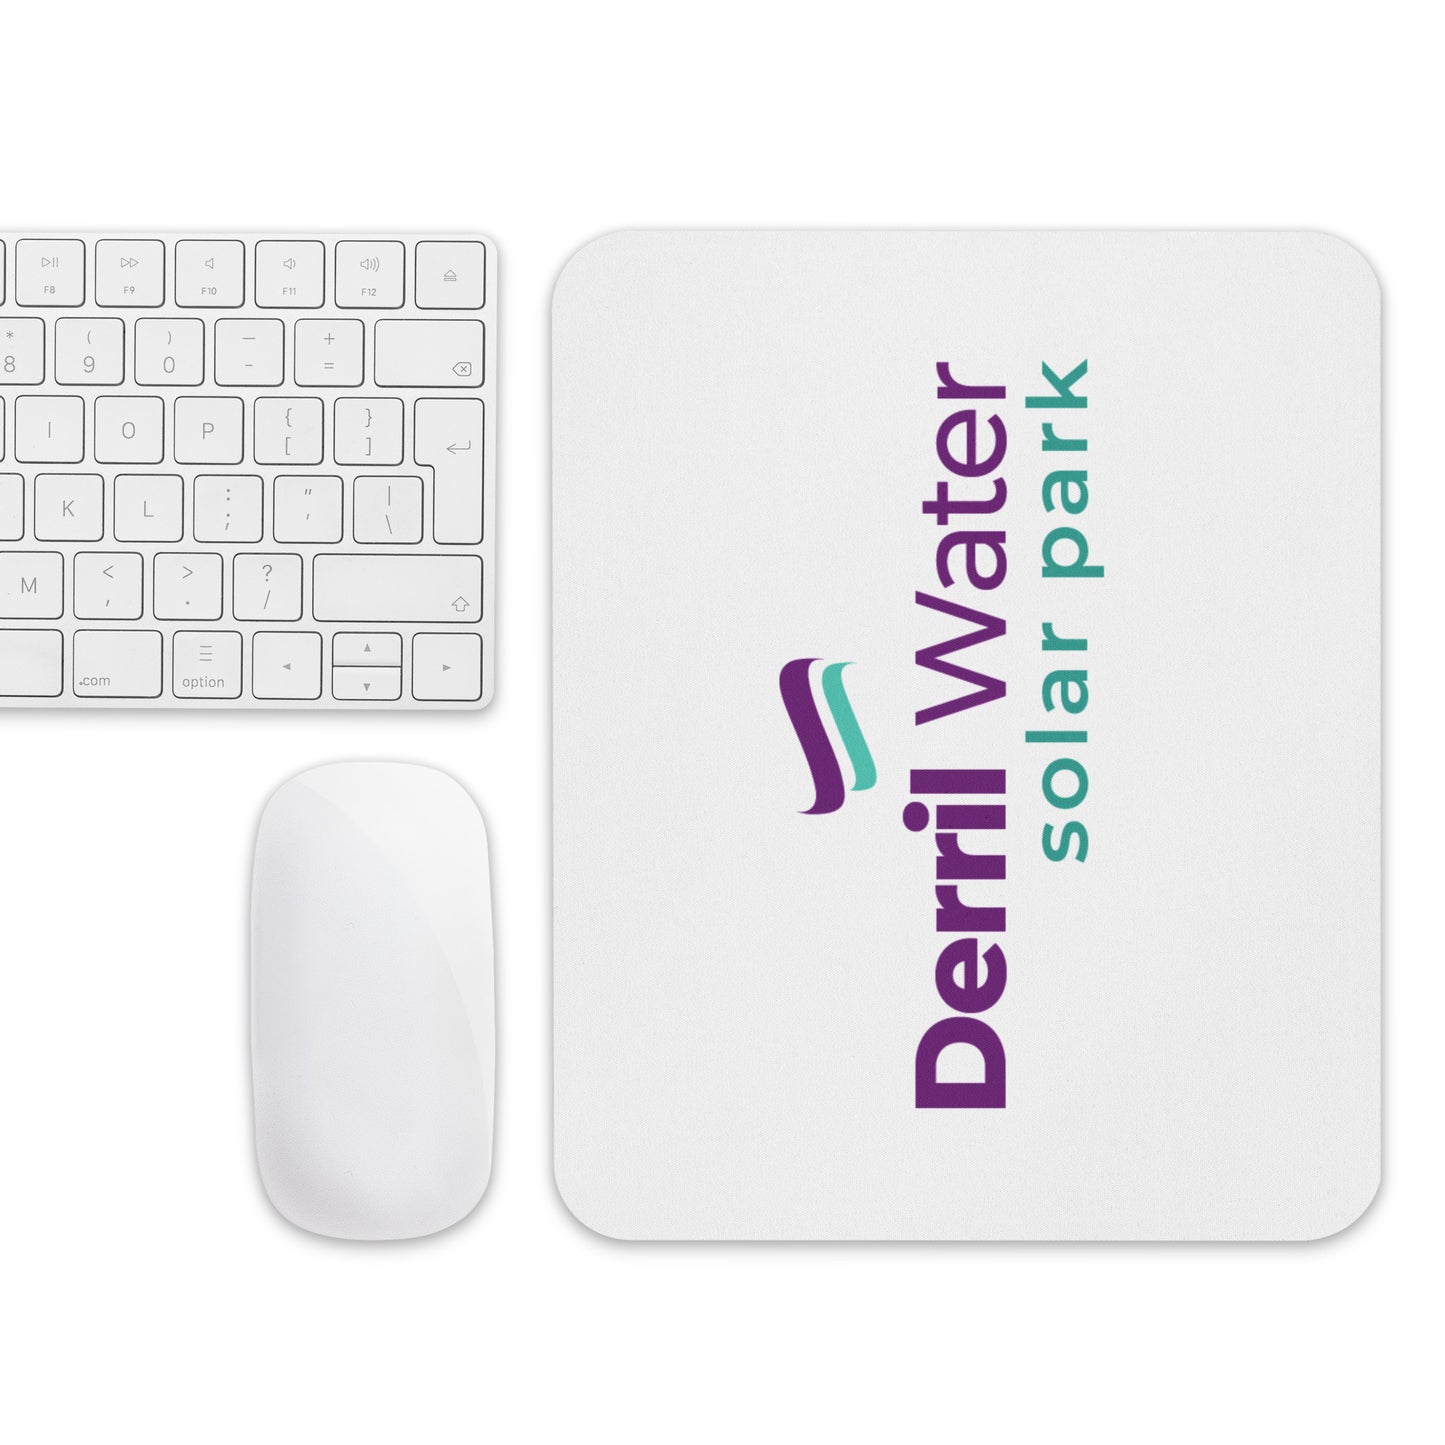 Derril Water Mouse pad